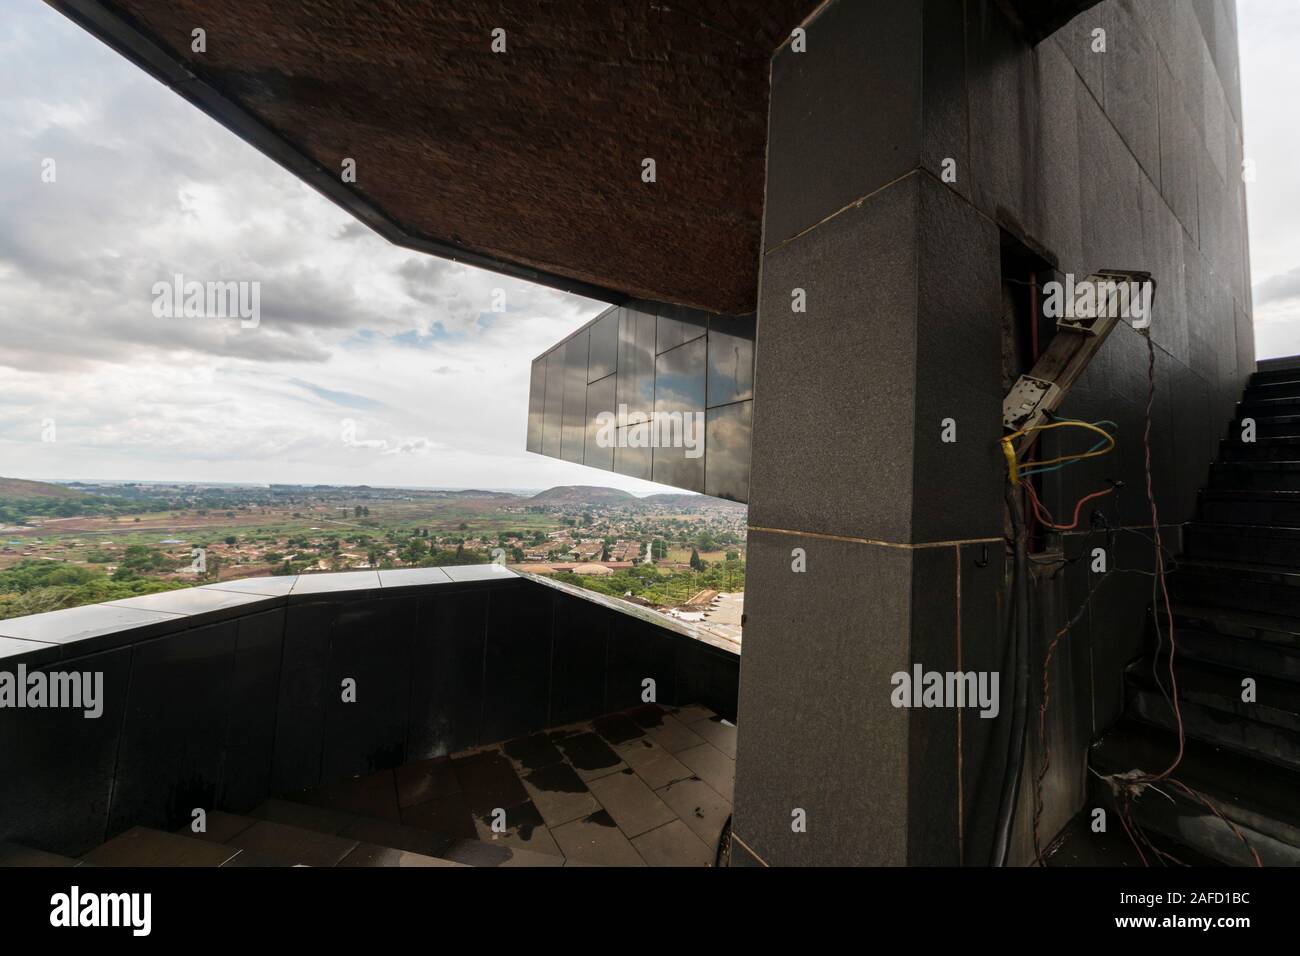 An exposed broken elecrical panel on the monument in the Zimbabwe's national heroes acre in Harare, the country's capital, serves as a sign of the country's situation and its financial problems. The city of Harare can be seen in the background. Novmeber 2019. Stock Photo